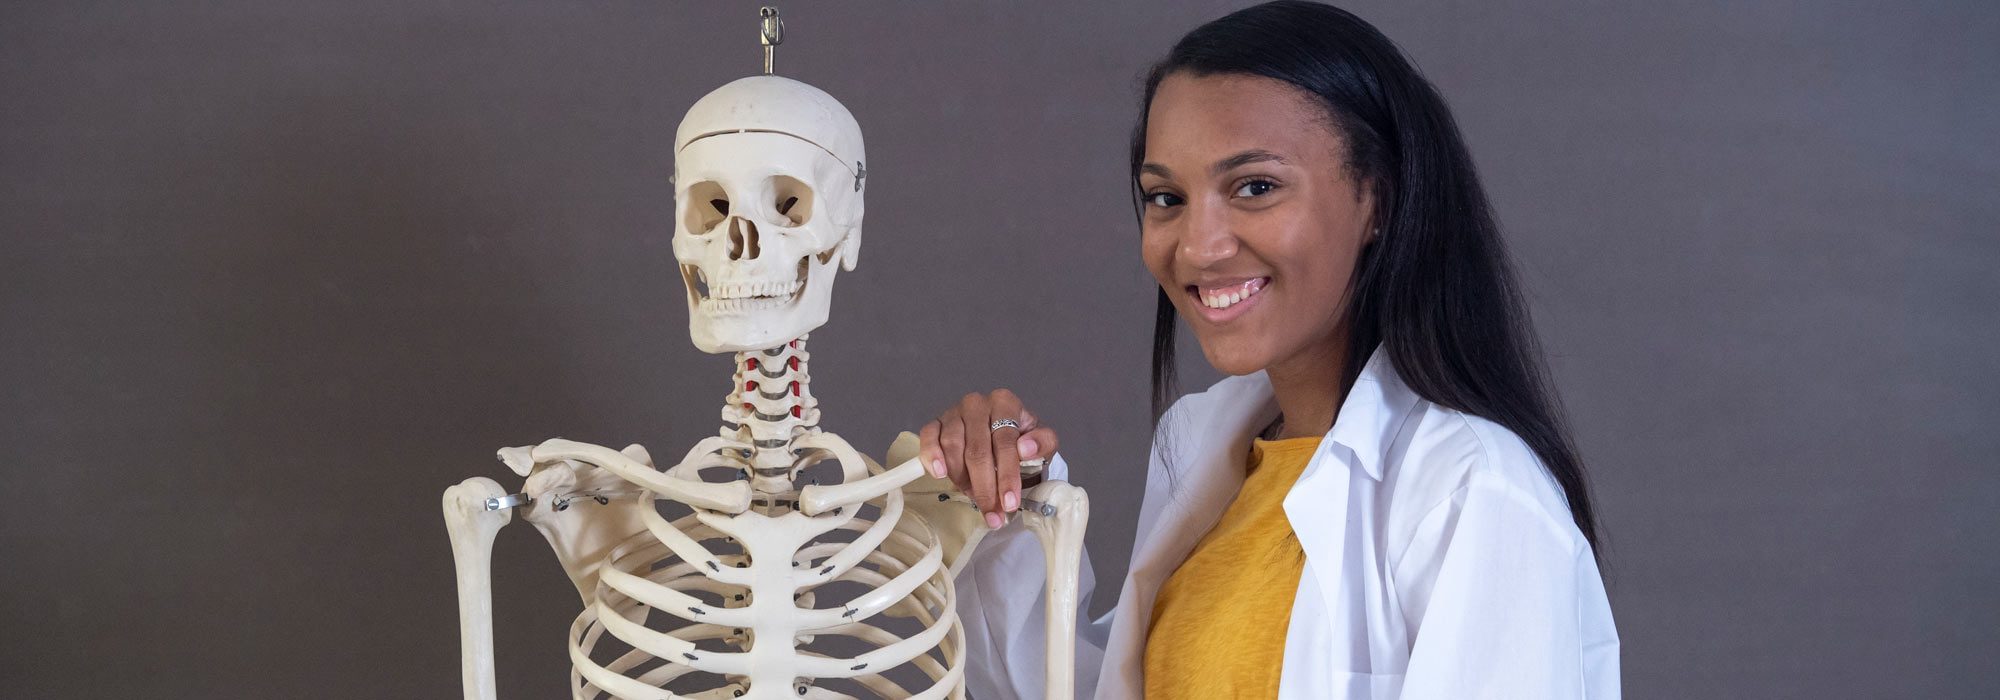 Health Professions pre-health major standing next to skelton at UMHB.